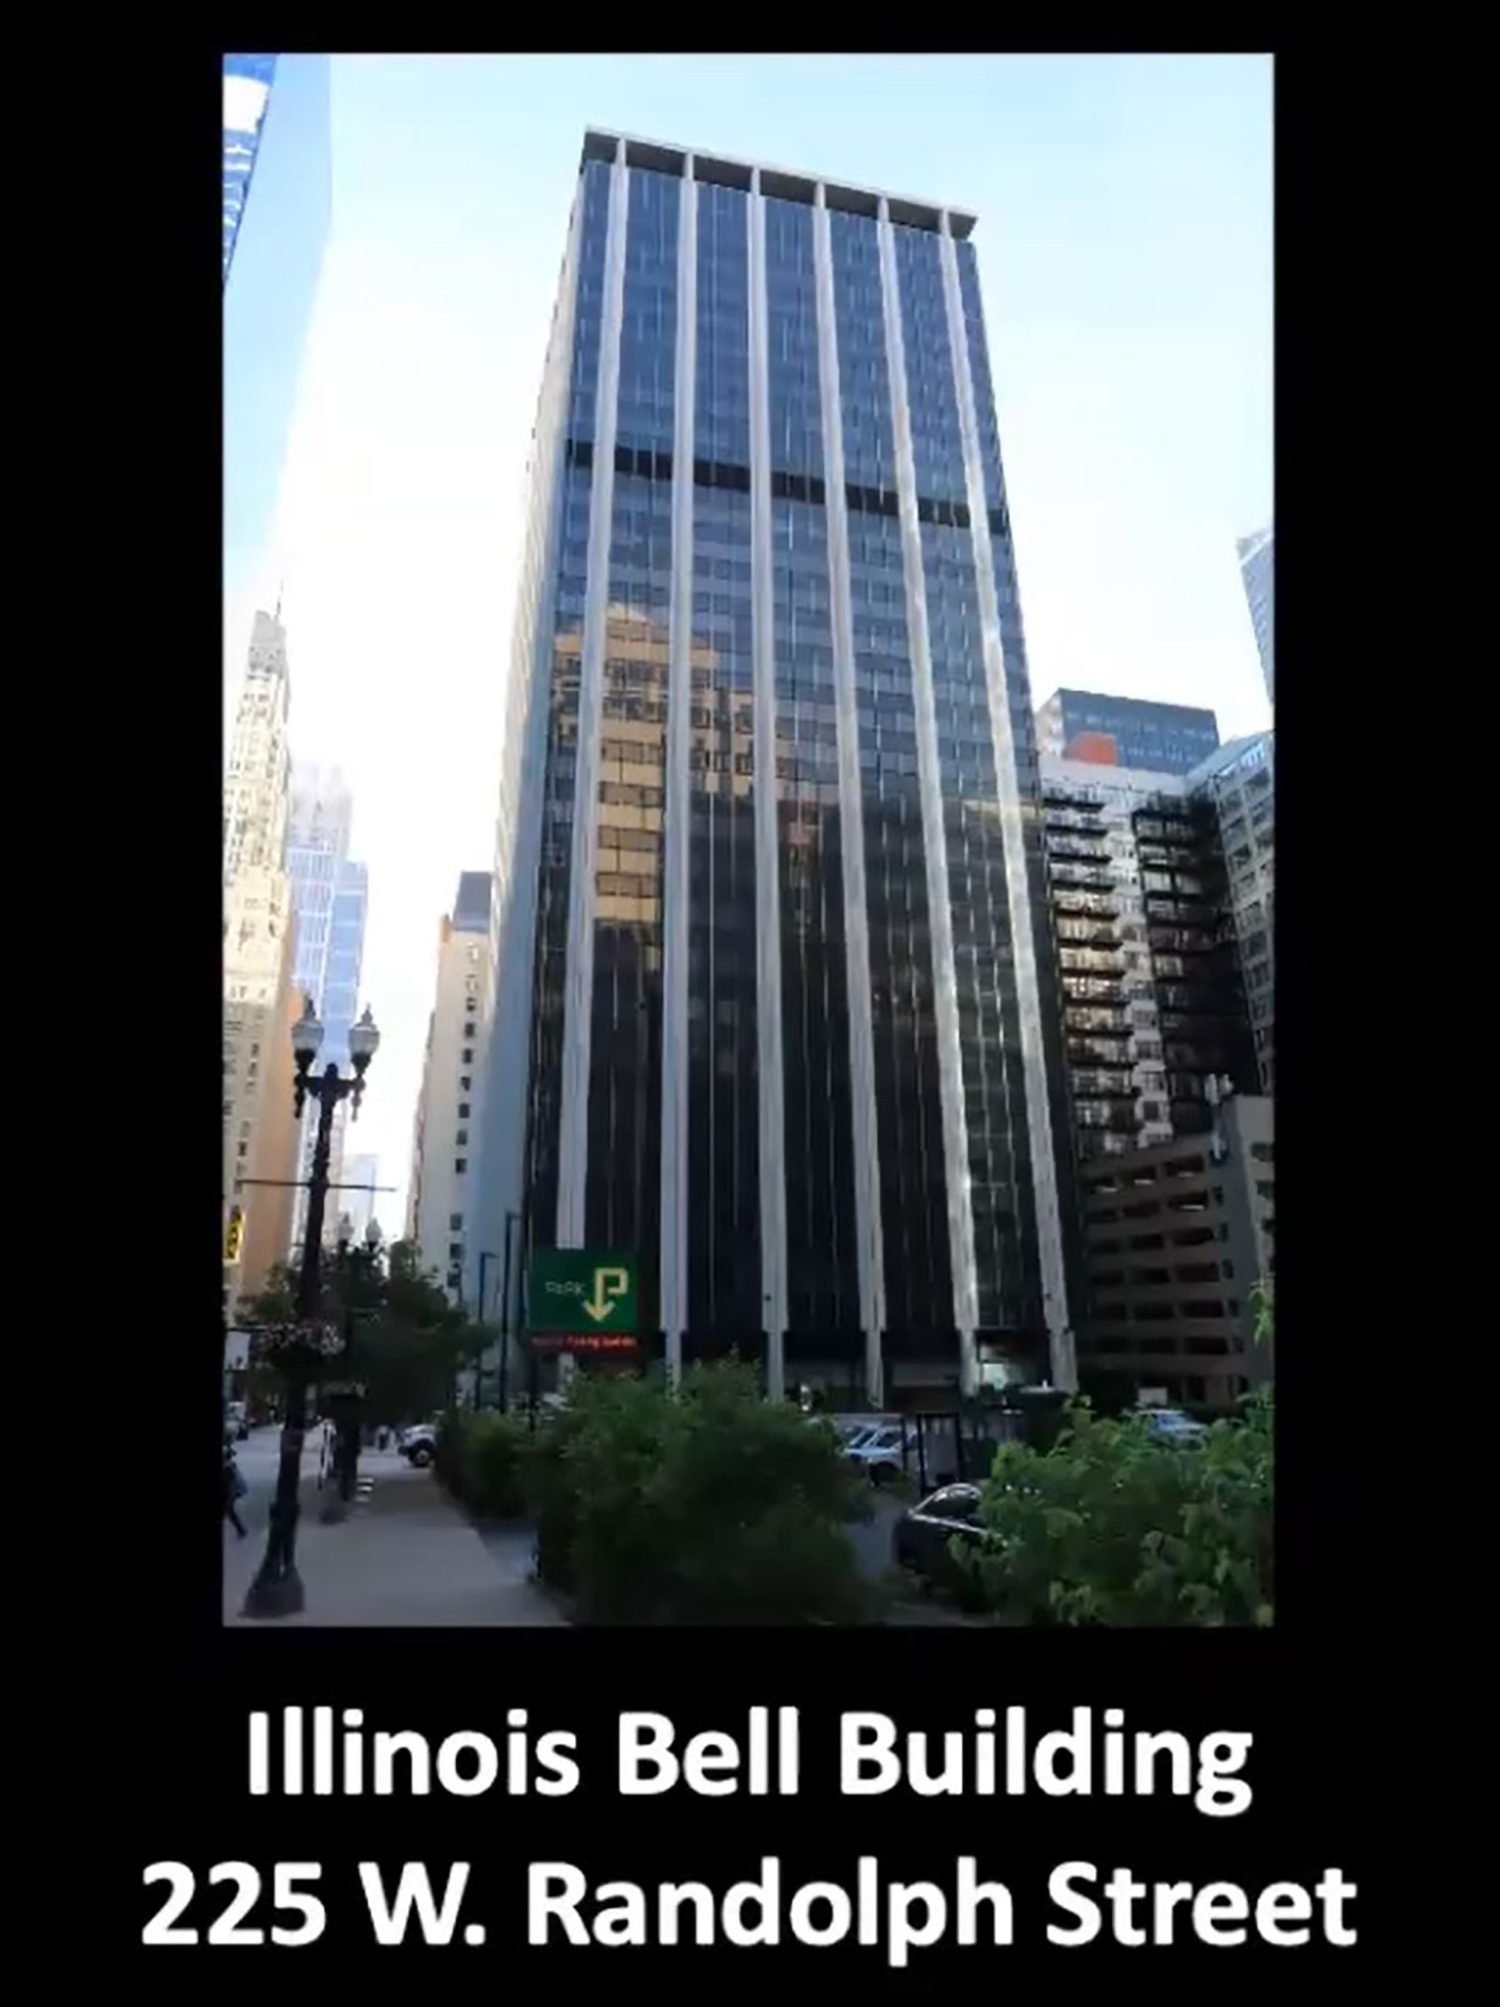 Illinois Bell Building. Image by CCL